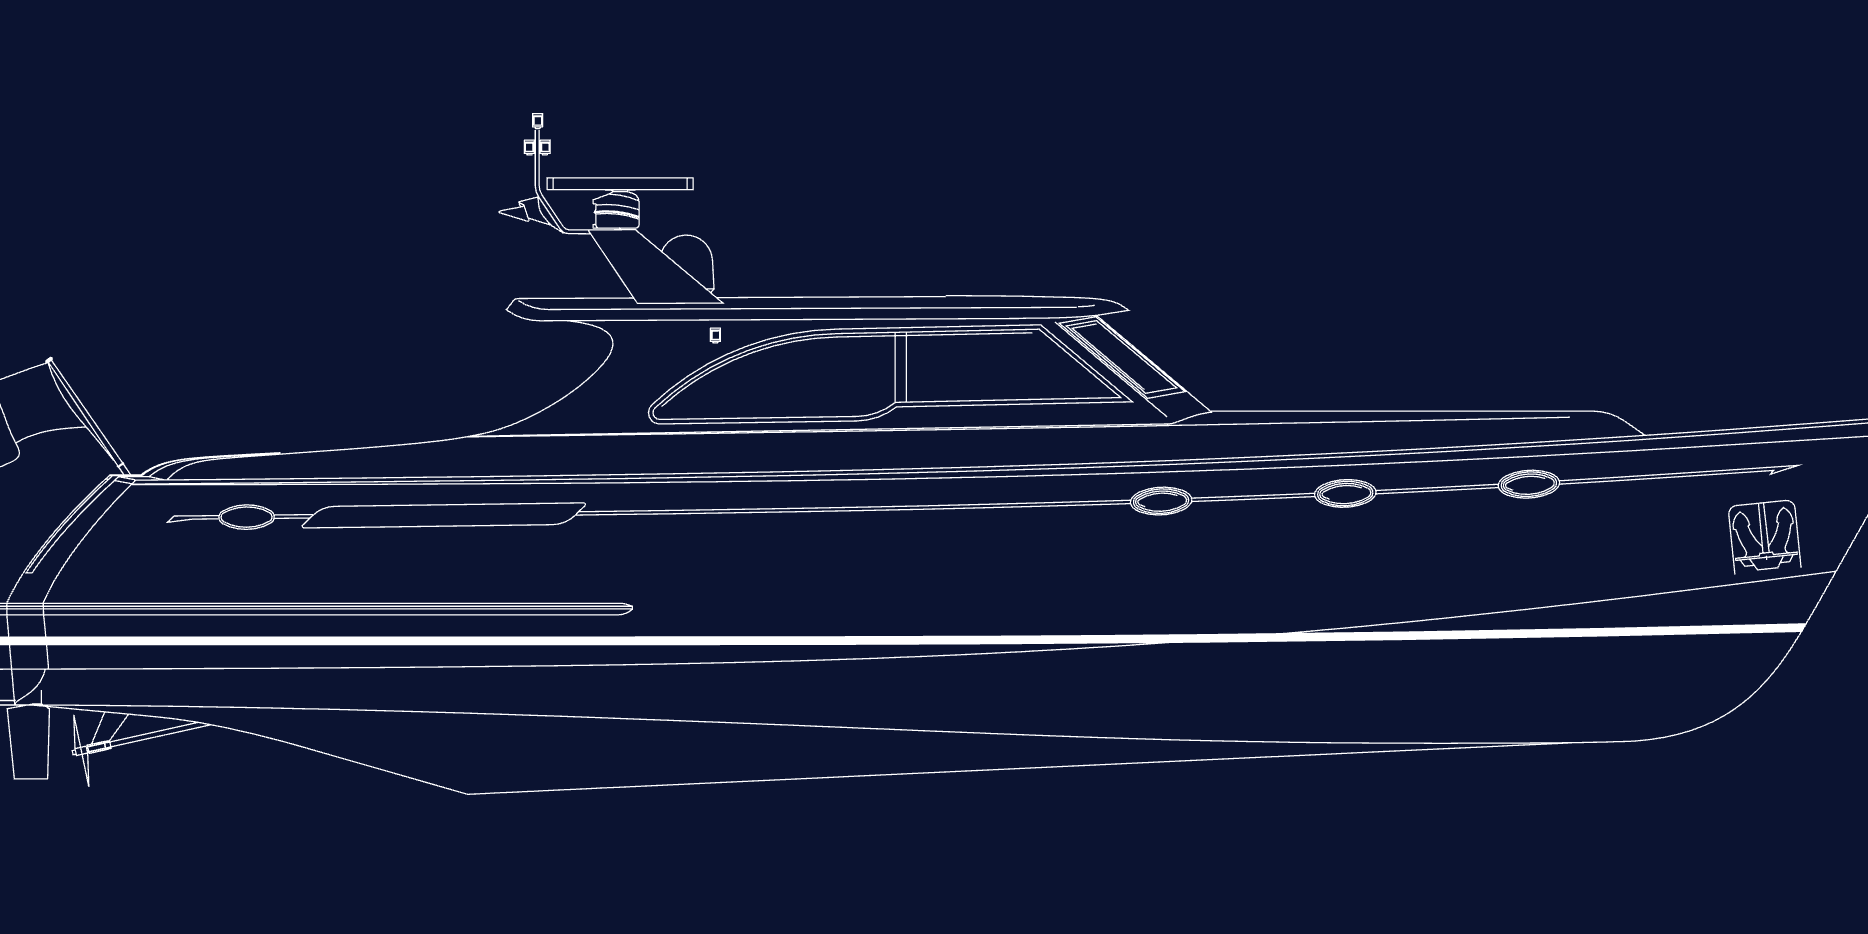 Blueprint image of Duchy 60 profile - Duchy Motor Launches Boat Sales Sydney